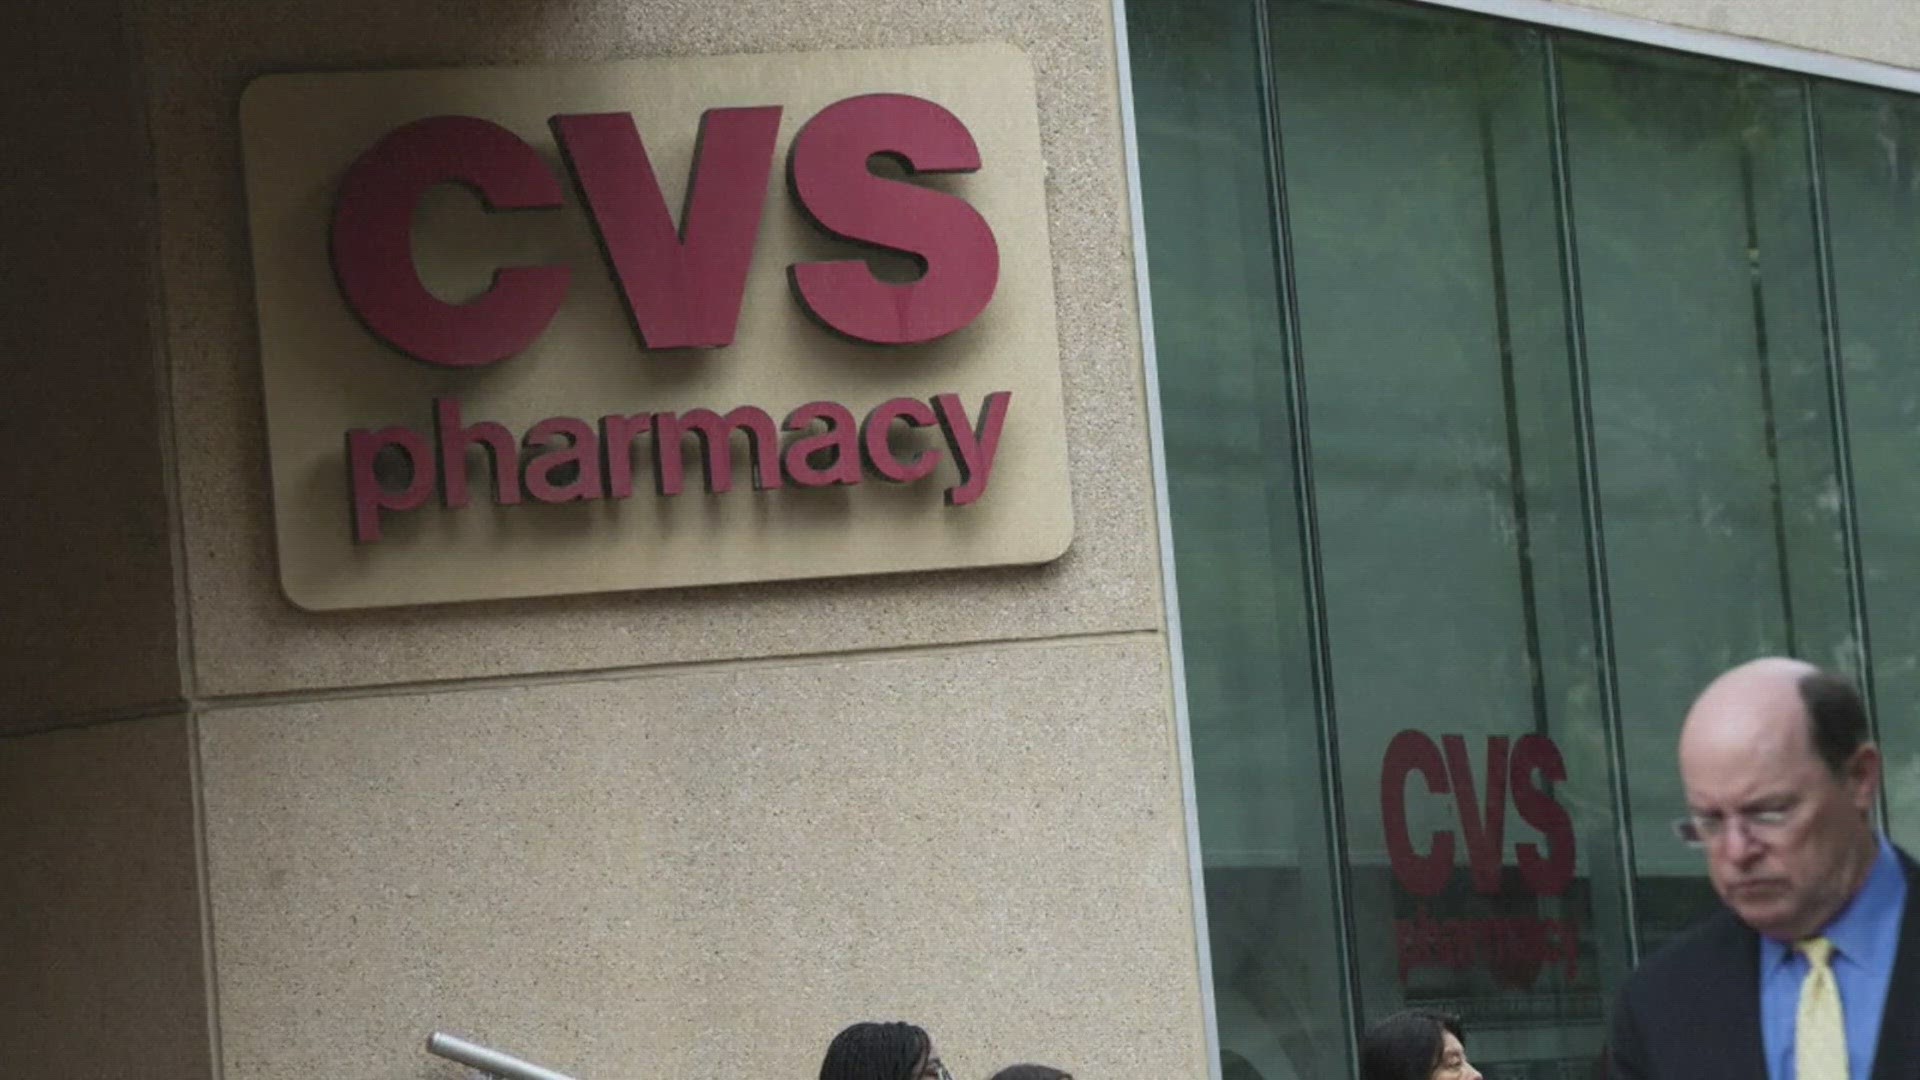 5,000 CVS corporate employees expected to be laid off